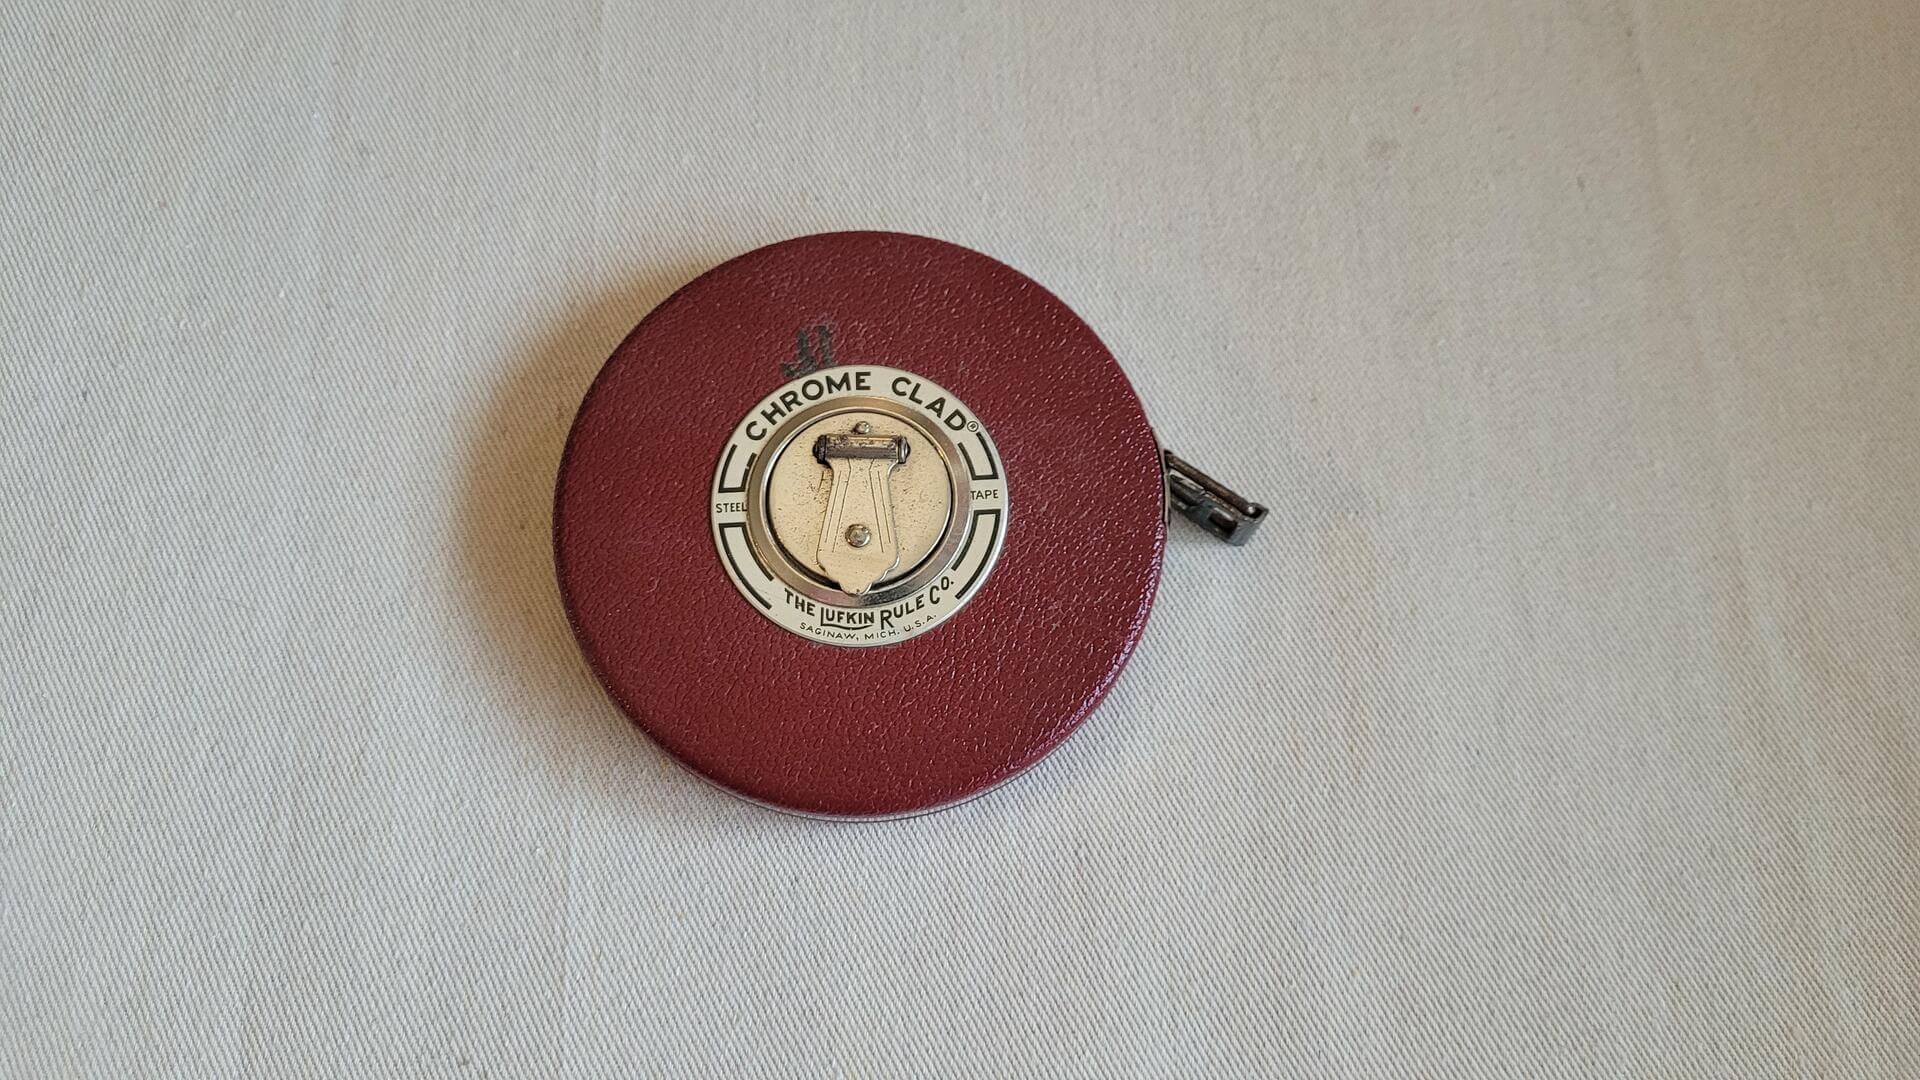 Vintage Lufkin Rule Co. 100' crome clad steel tape measure with Saginaw MI red leather case and Barrie ON chrome tape manufactured for Canadian market. Antique made in both USA and Canada collectible marking and measuring tool.